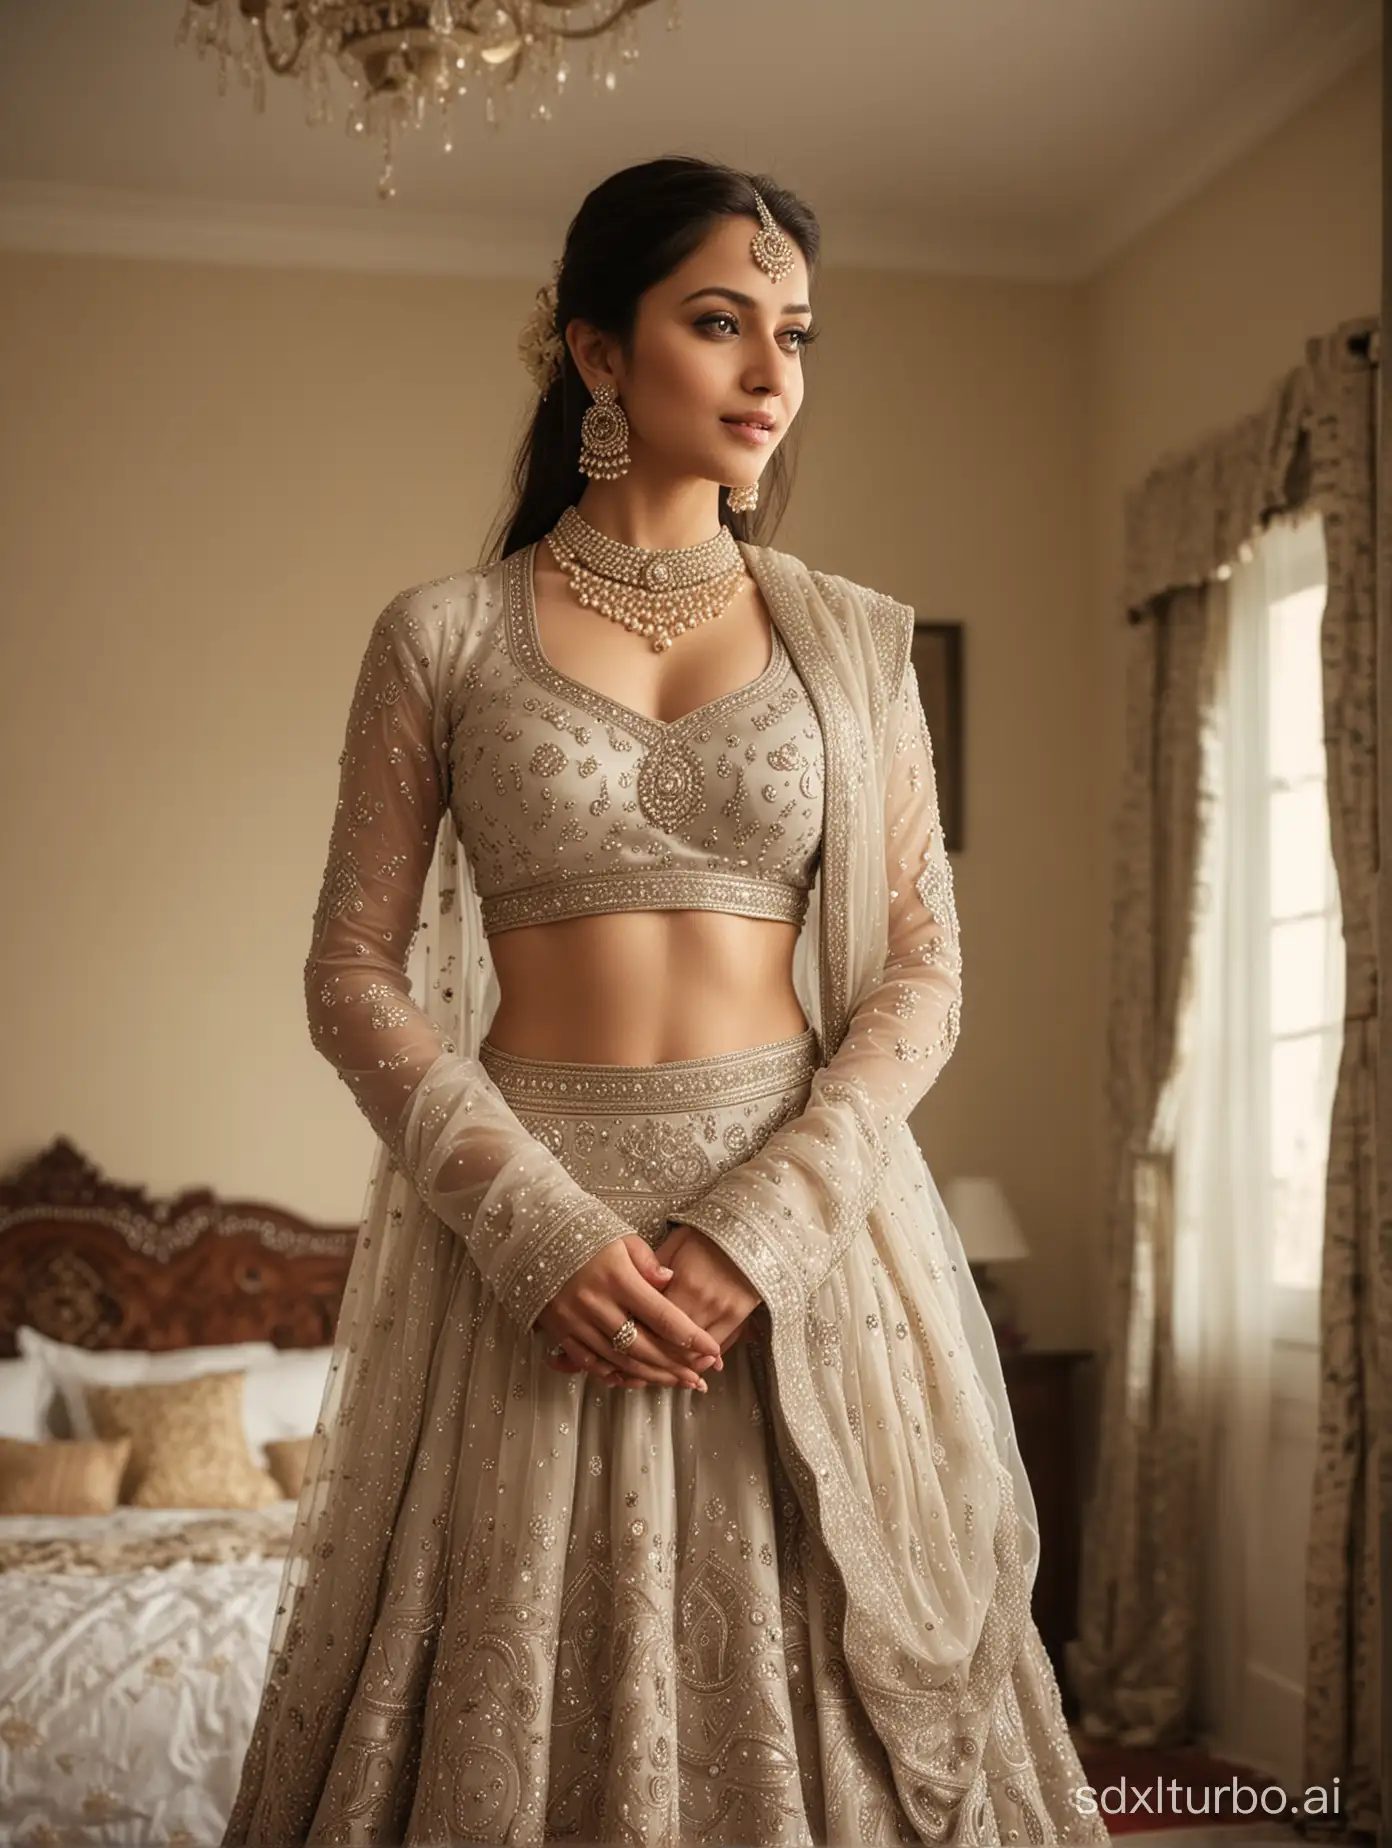 Beautiful indian lady with pale skin wearing expensive silver jewellery and neutral lehenga printed in pichwai motifs and embroidered with pearls and resham standing in a bedroom which is furnished in traditional Indian style, room brightly lit, emulate Nikon D6 shot, wide angle shot, soft warm lighting, photorealistic